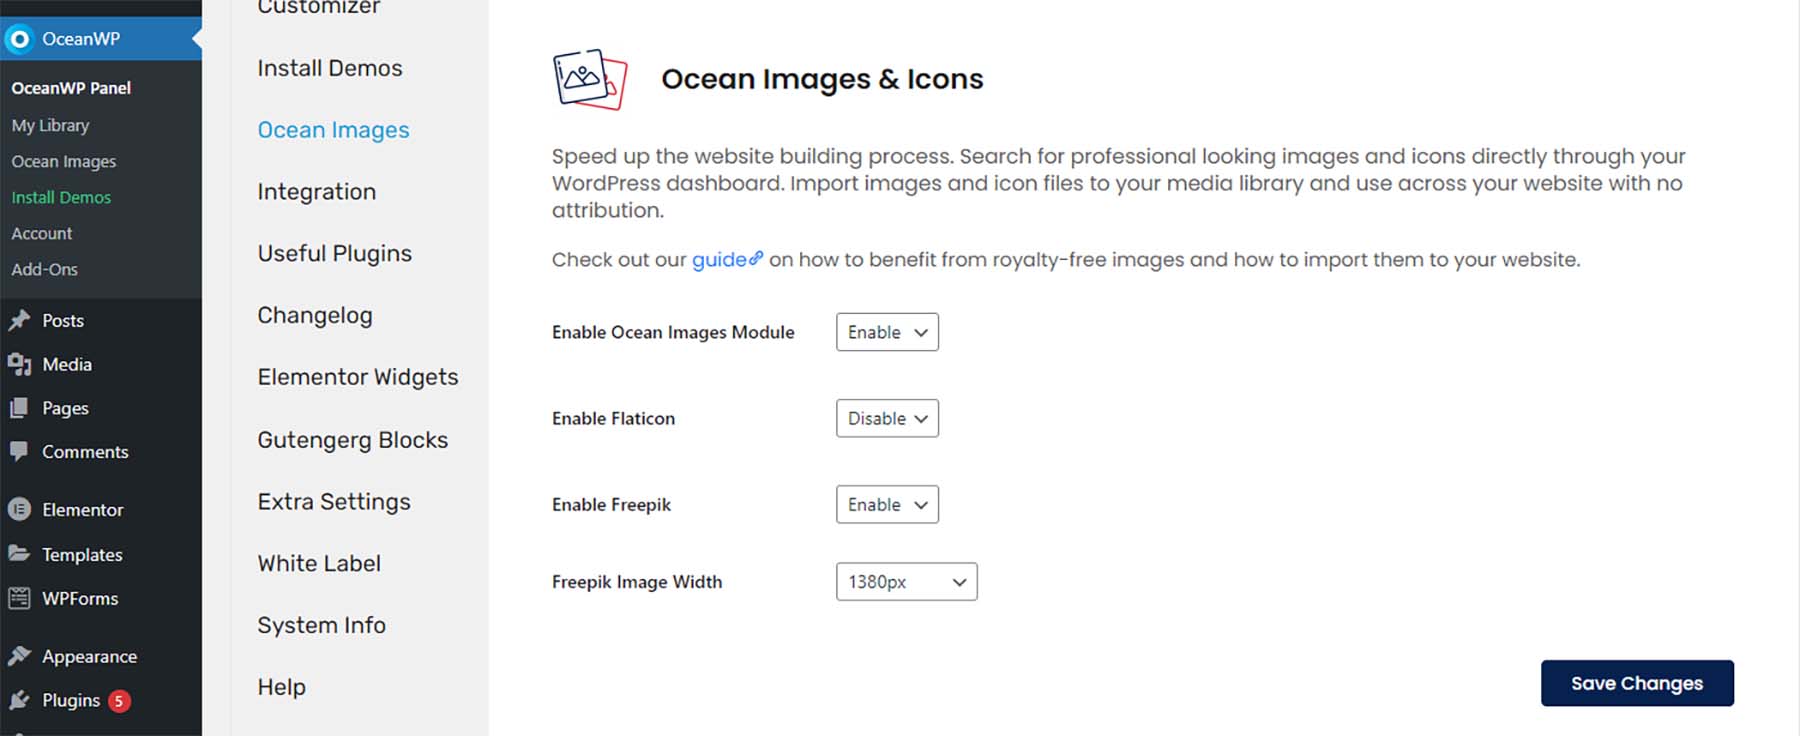 Ocean Images and Icons